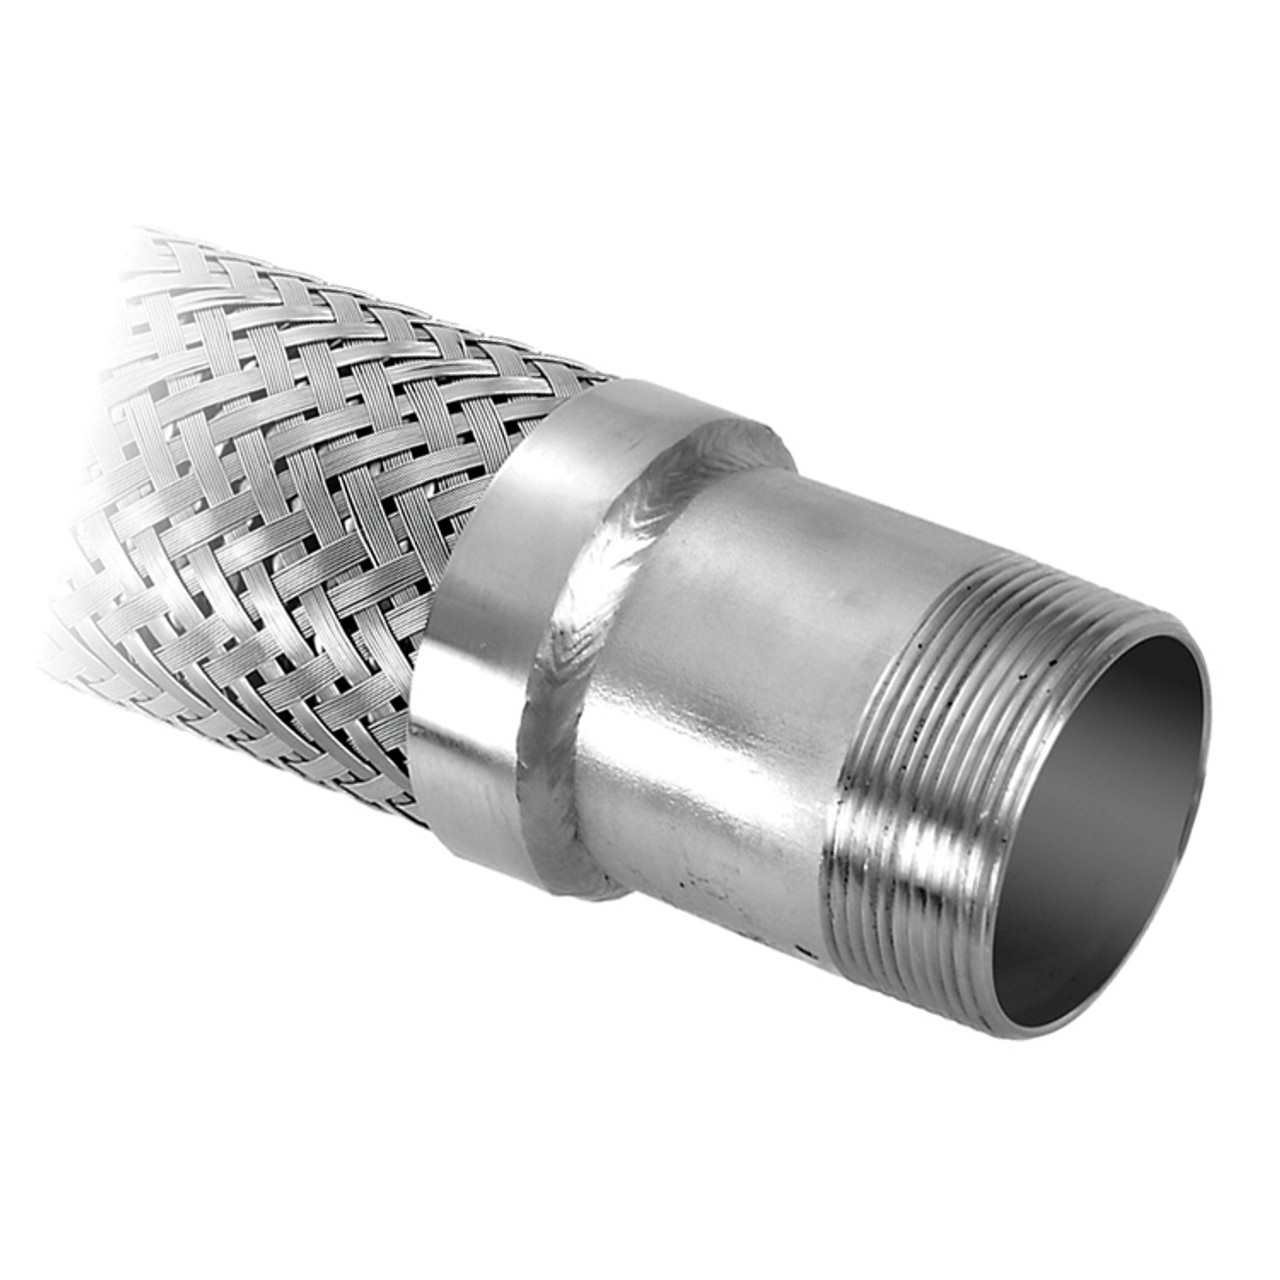 3/8 x 3/8" x 12" Stainless Steel Hose Assembly CSA w/ Male Plain NPT Ends   G521CSA-038MM-12